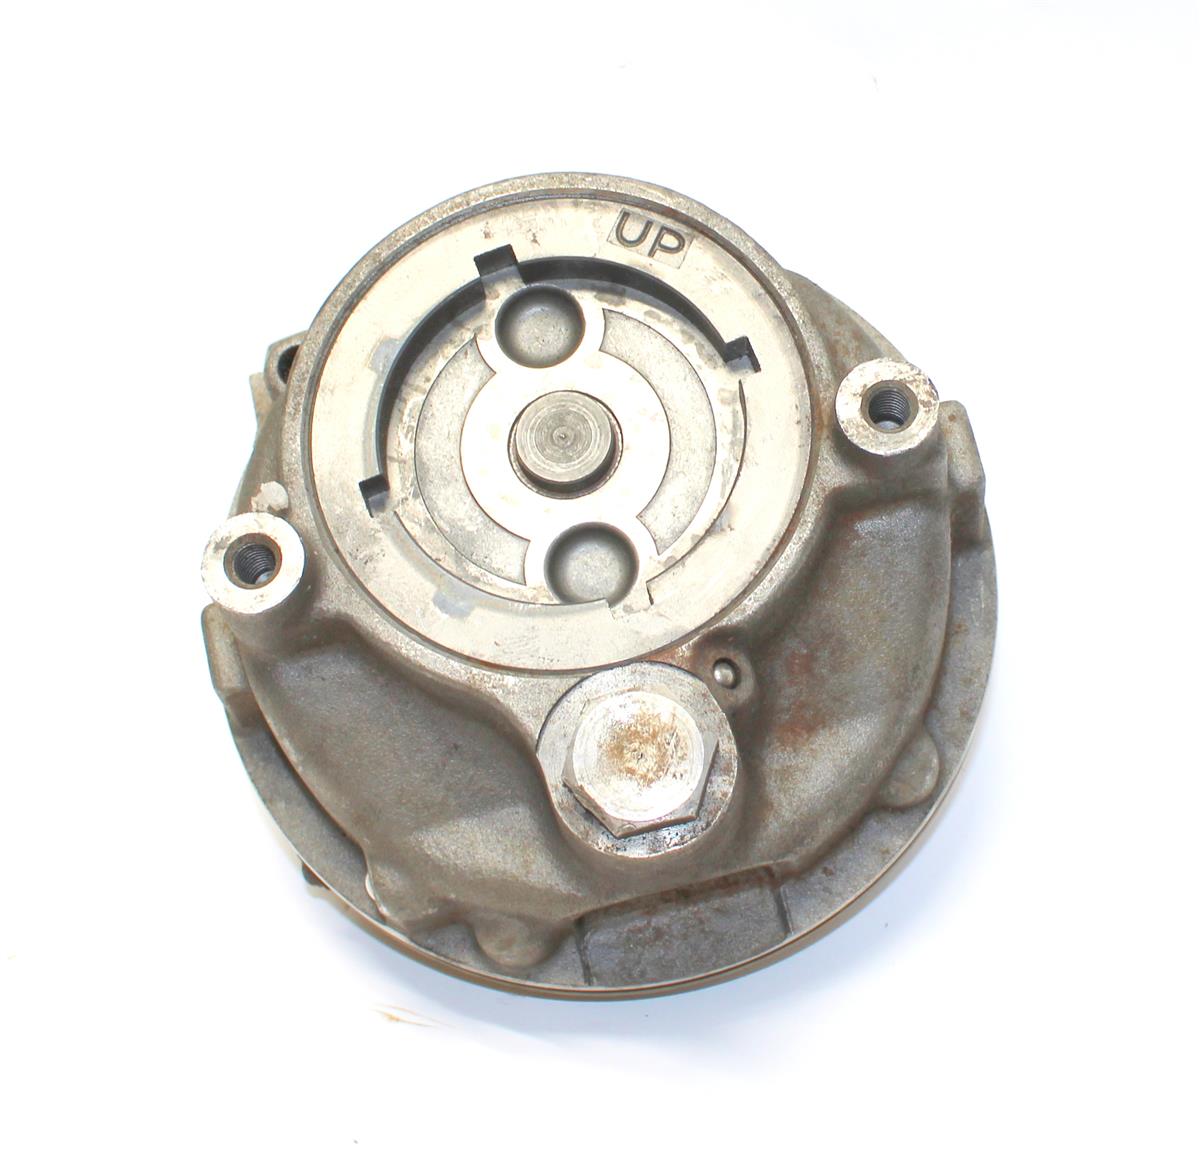 9M-1874 | 9M-1874 Power Steering Pump without Reservoir M939 M939A1 (10).JPG